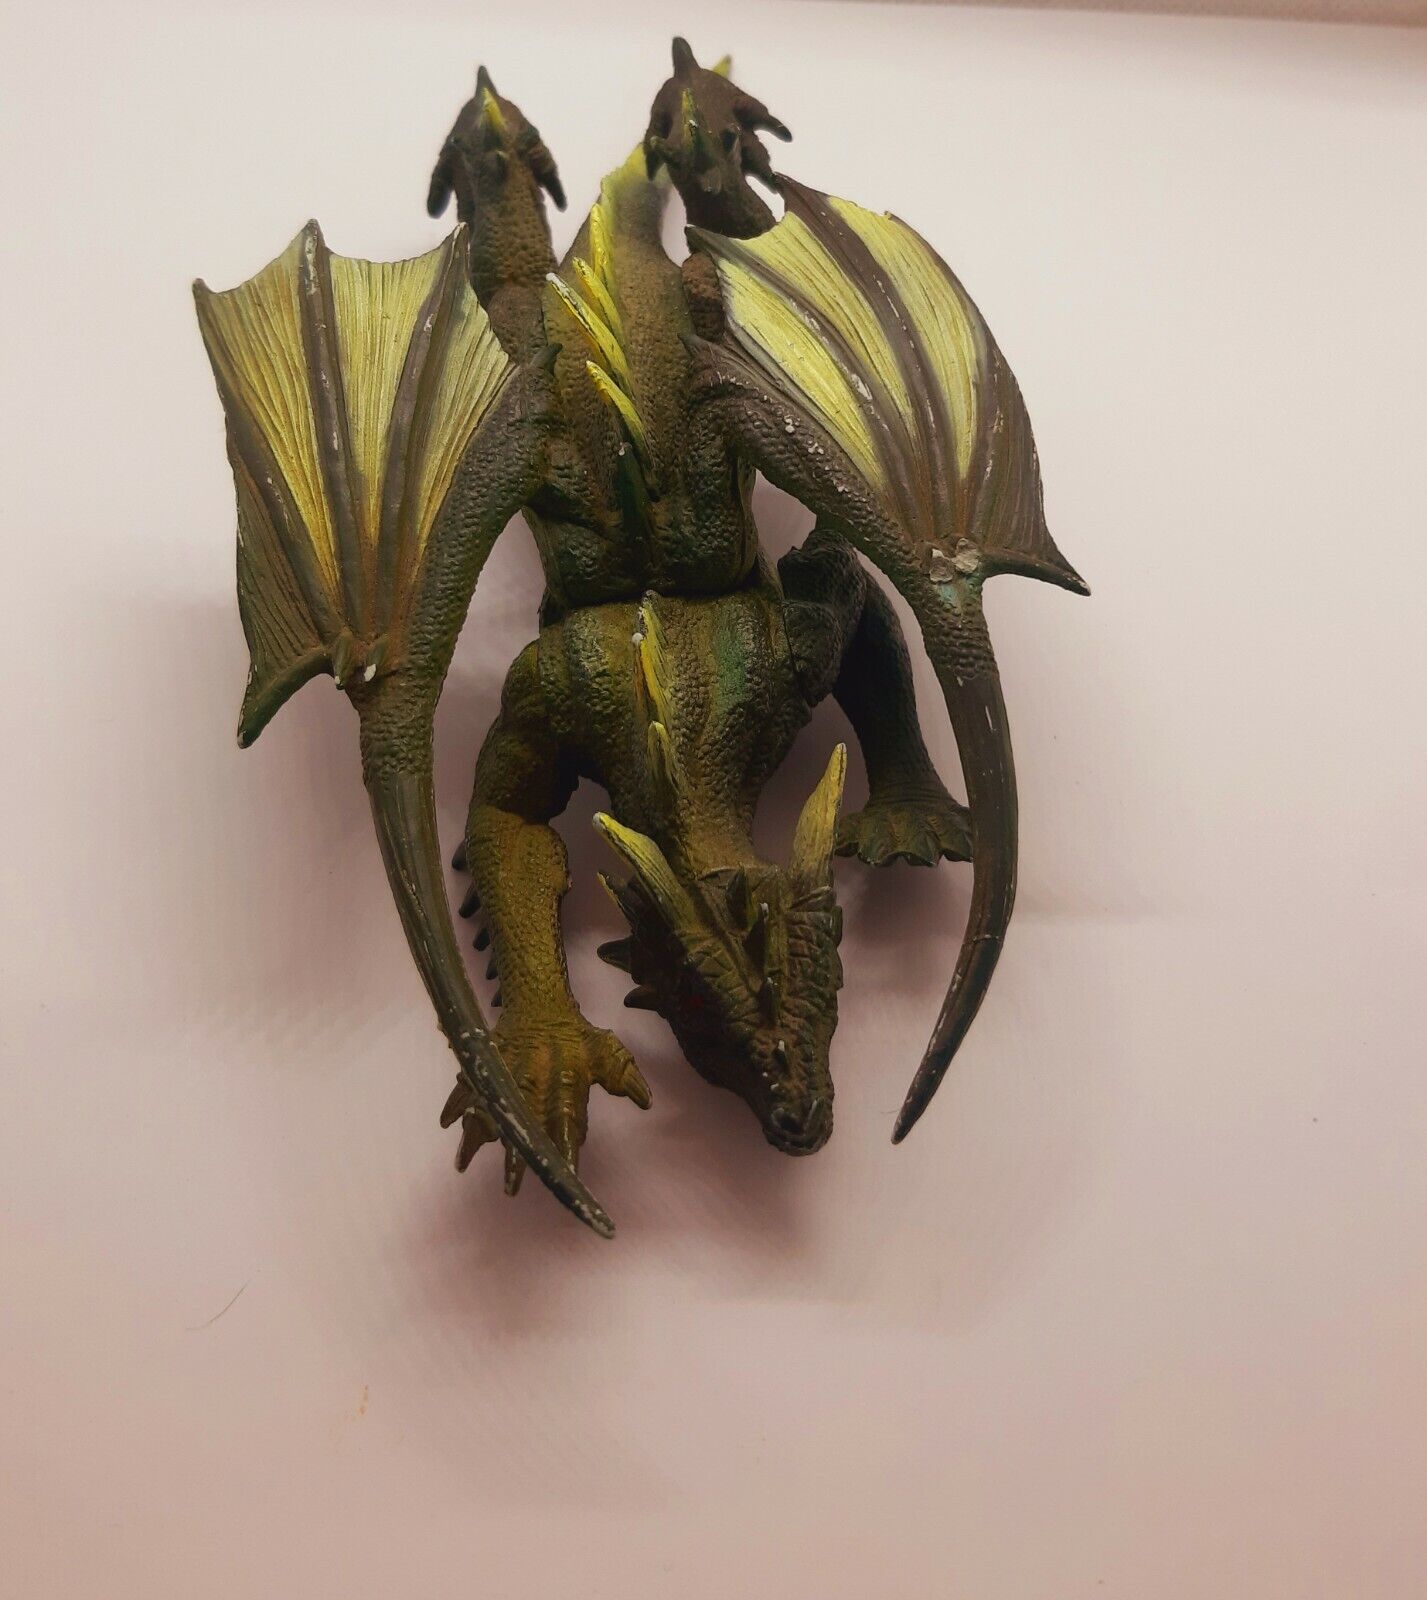 vintage rubber toy winged dragon dinosaur 2005-10 year